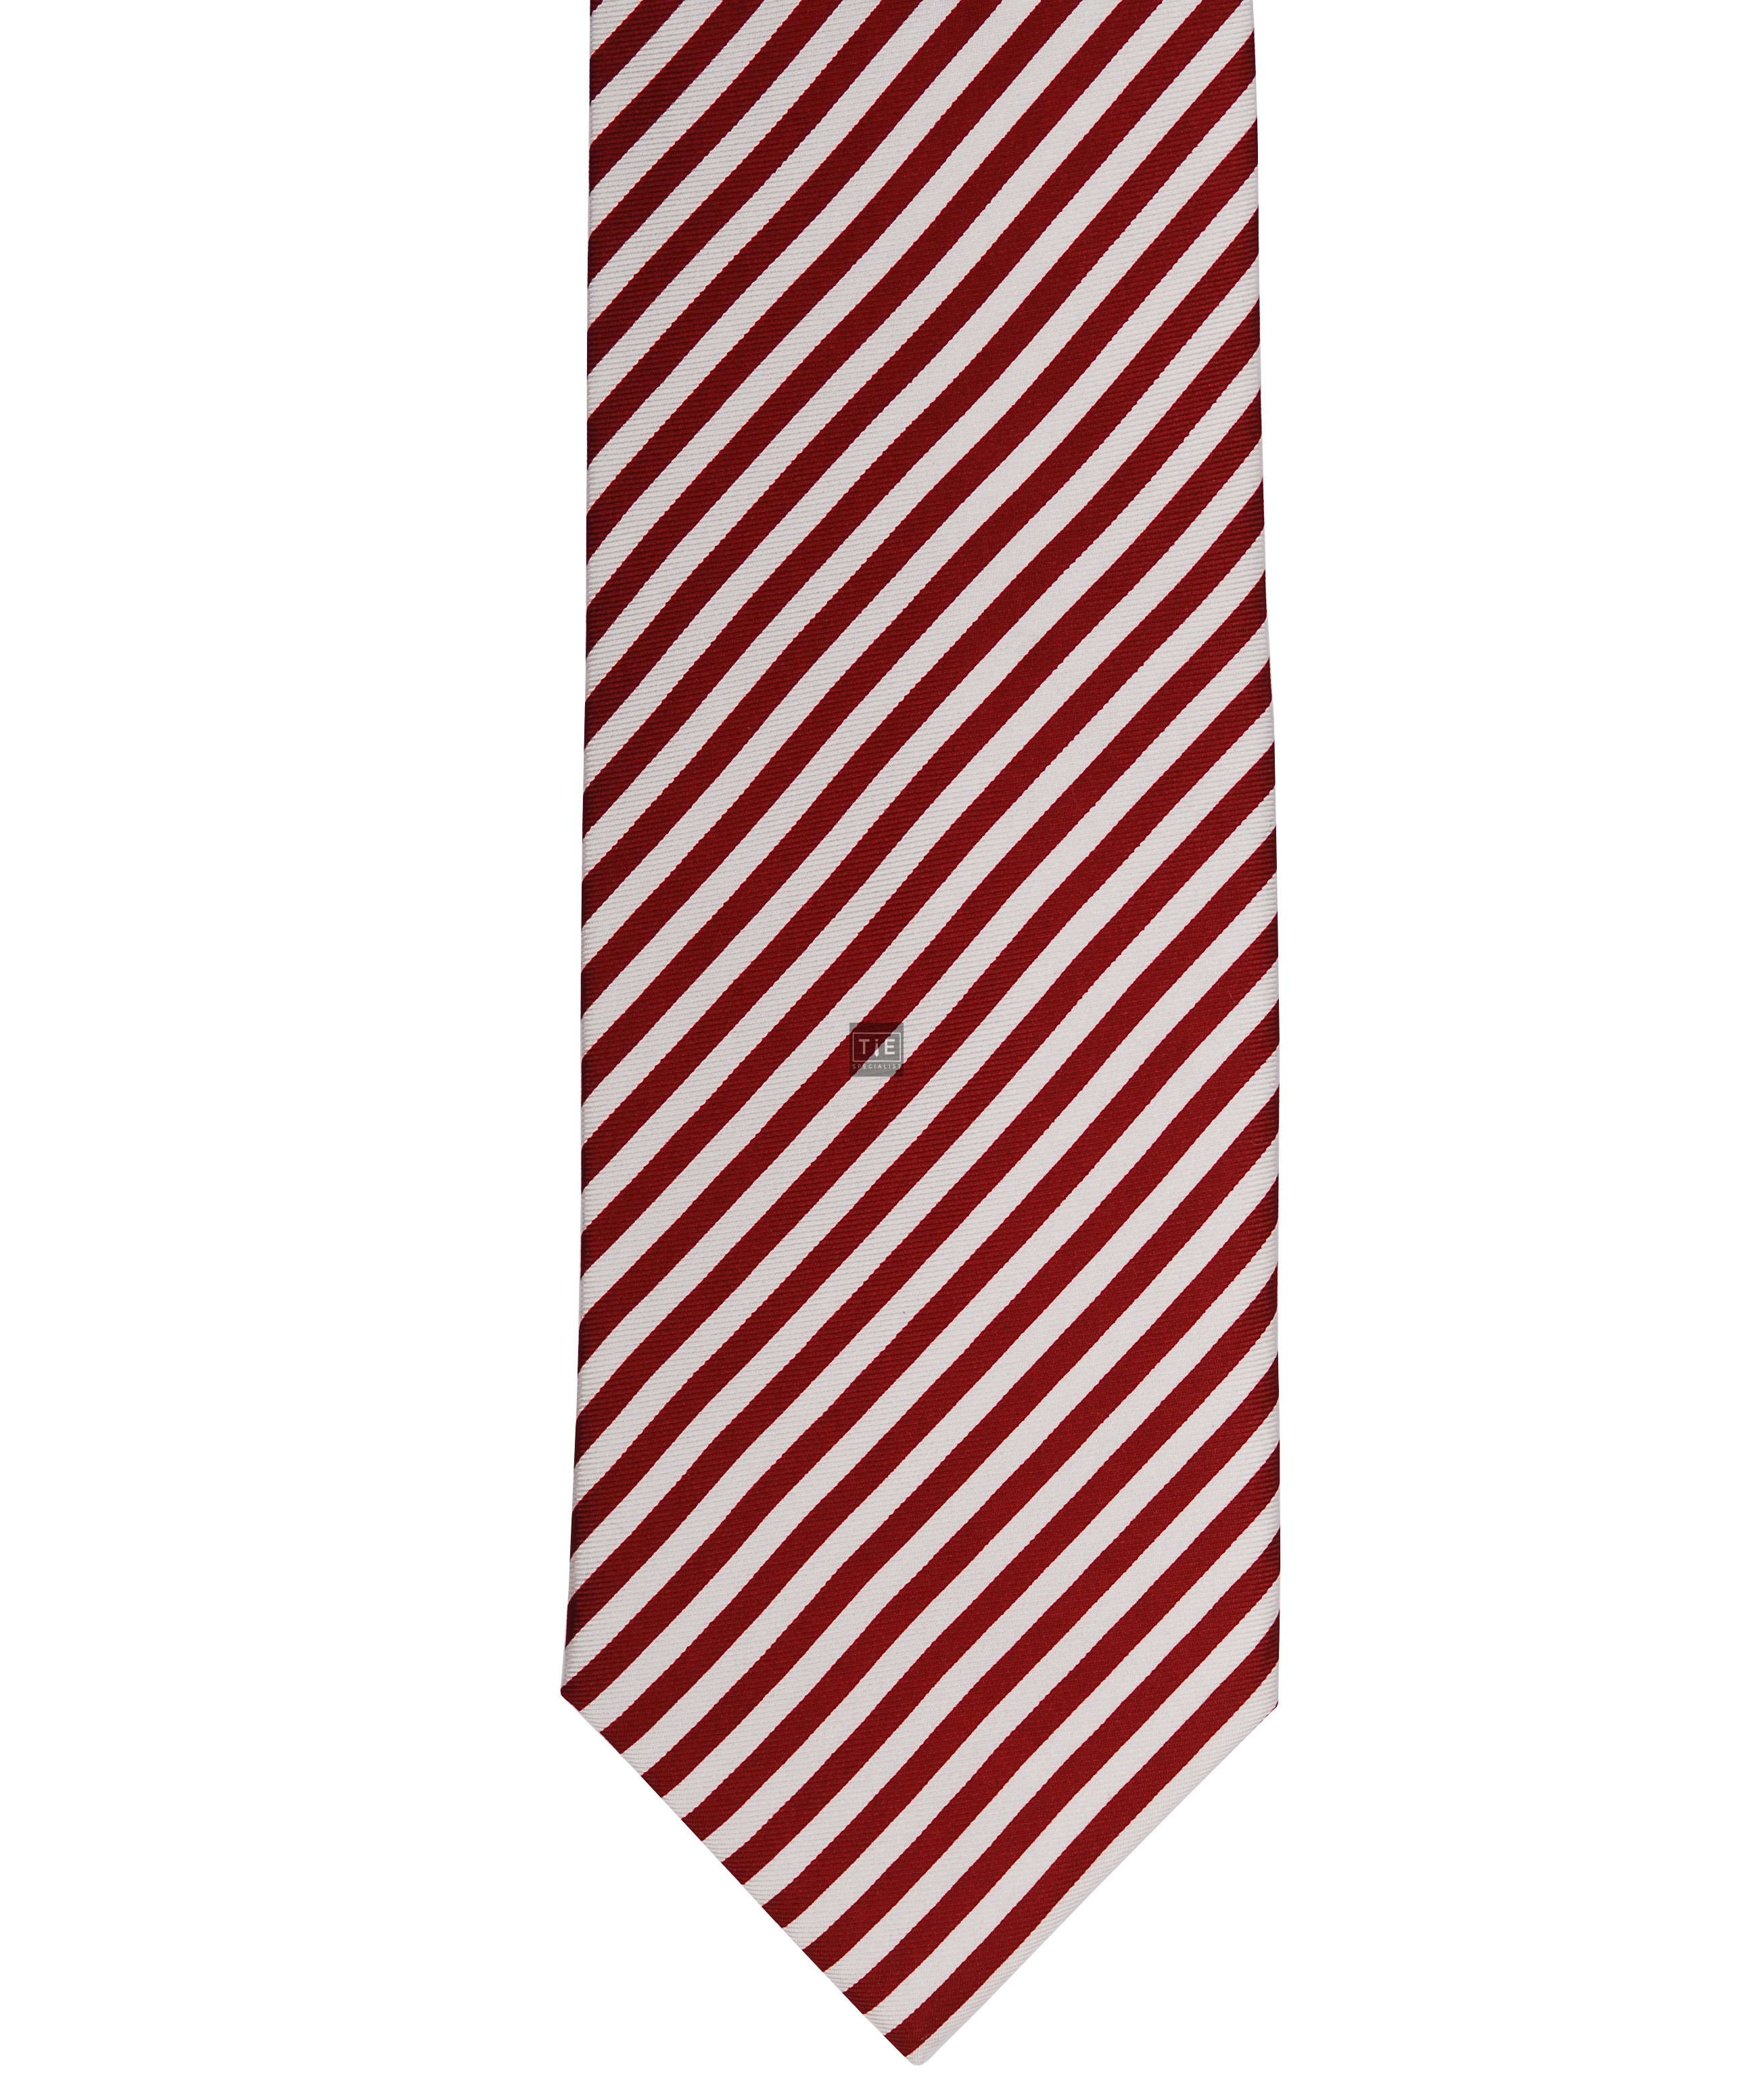 Striped Red and White Silk Tie with Matching Pocket Square